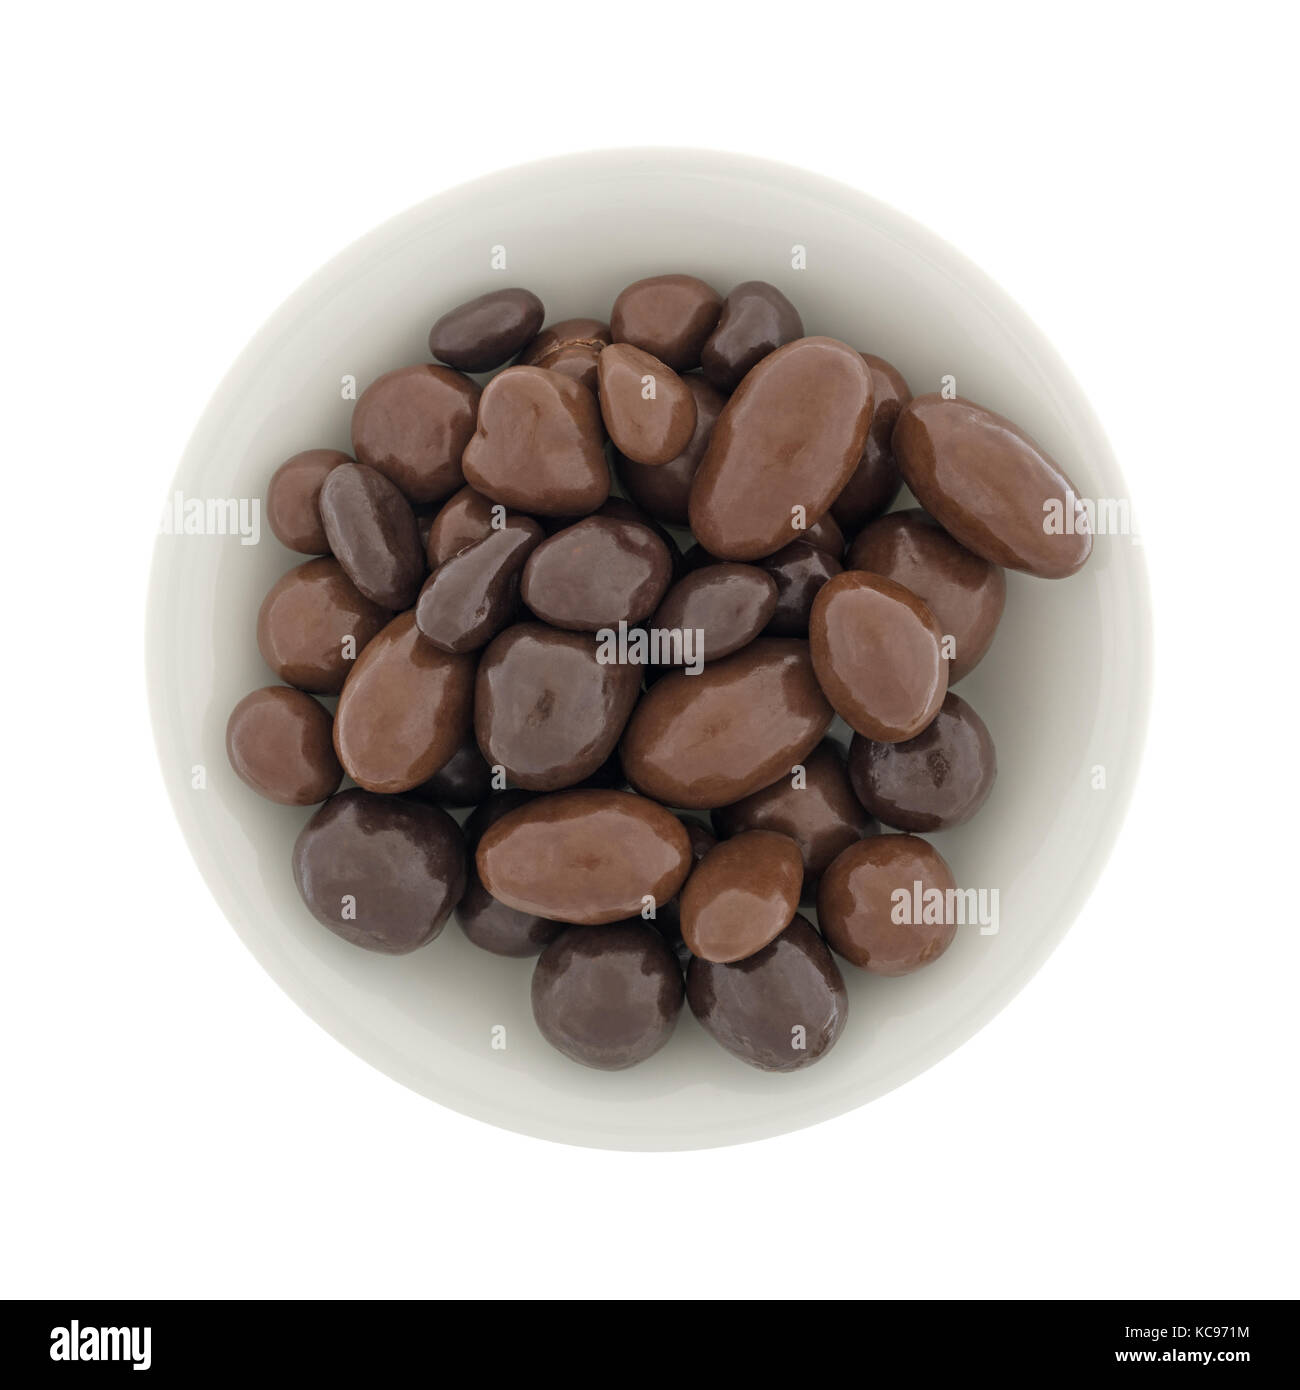 Top view of a bowl filled with bridge mix chocolate candy isolated on a white background. Stock Photo